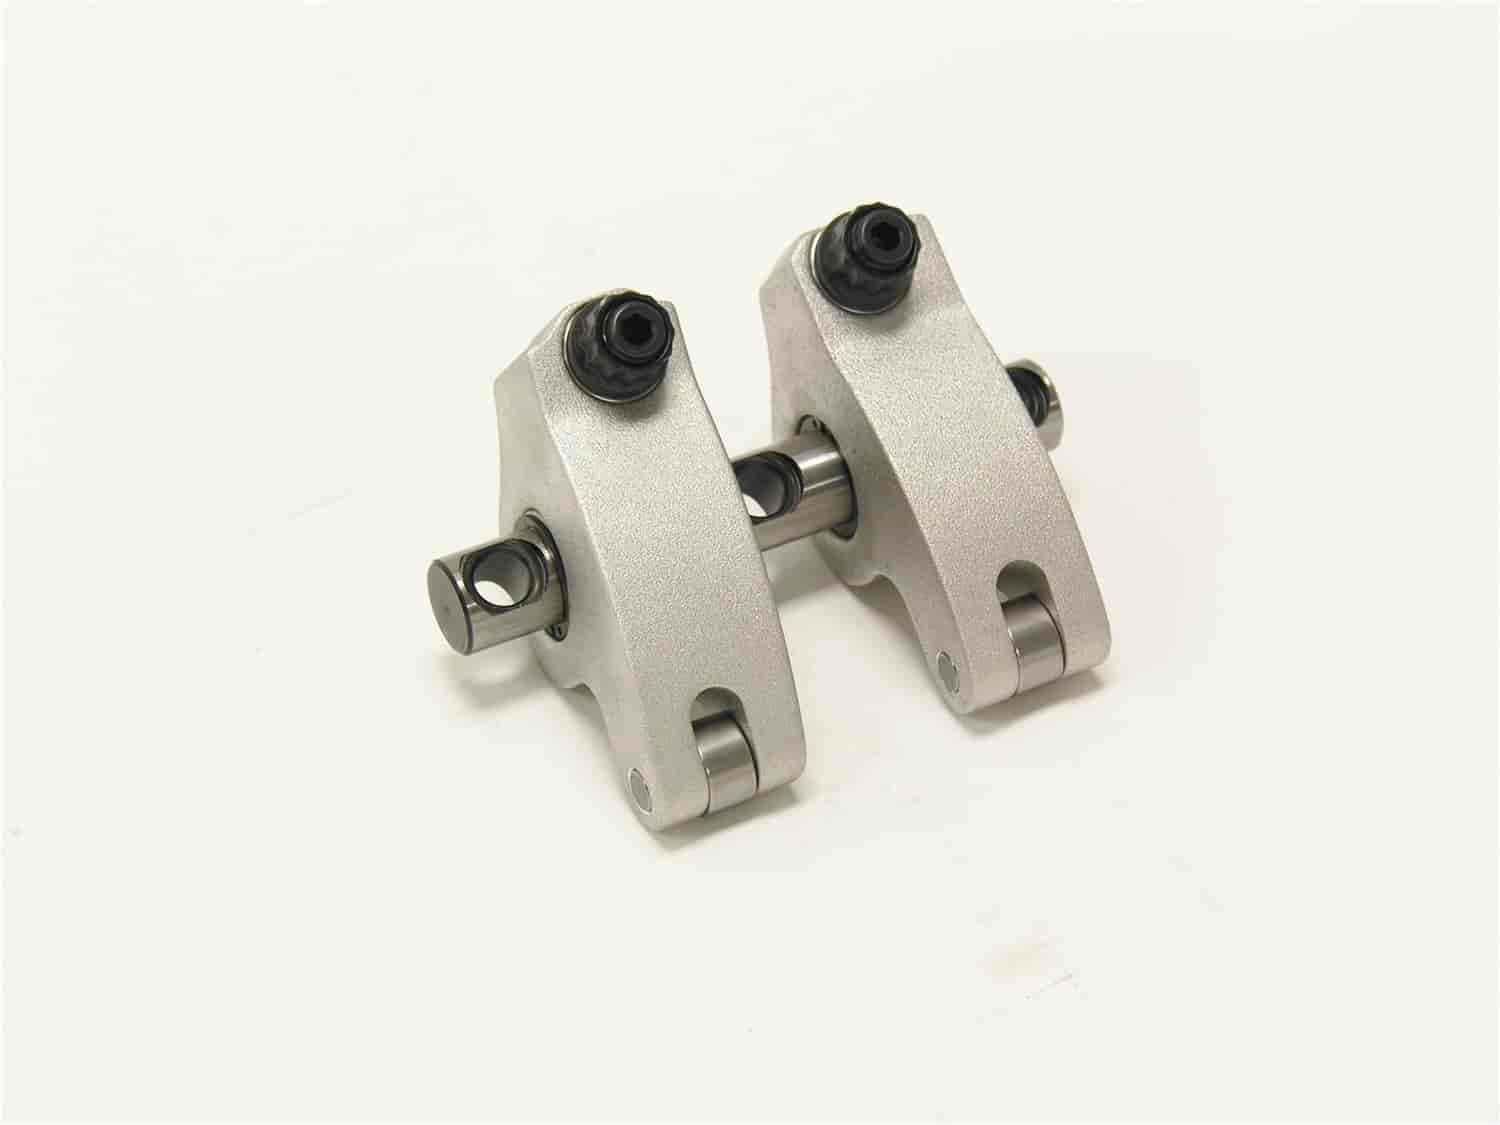 Series SS Shaft Mount Rockers Fits: World Products Motown Rocker Ratio: 1.5 IN / 1.5 EX